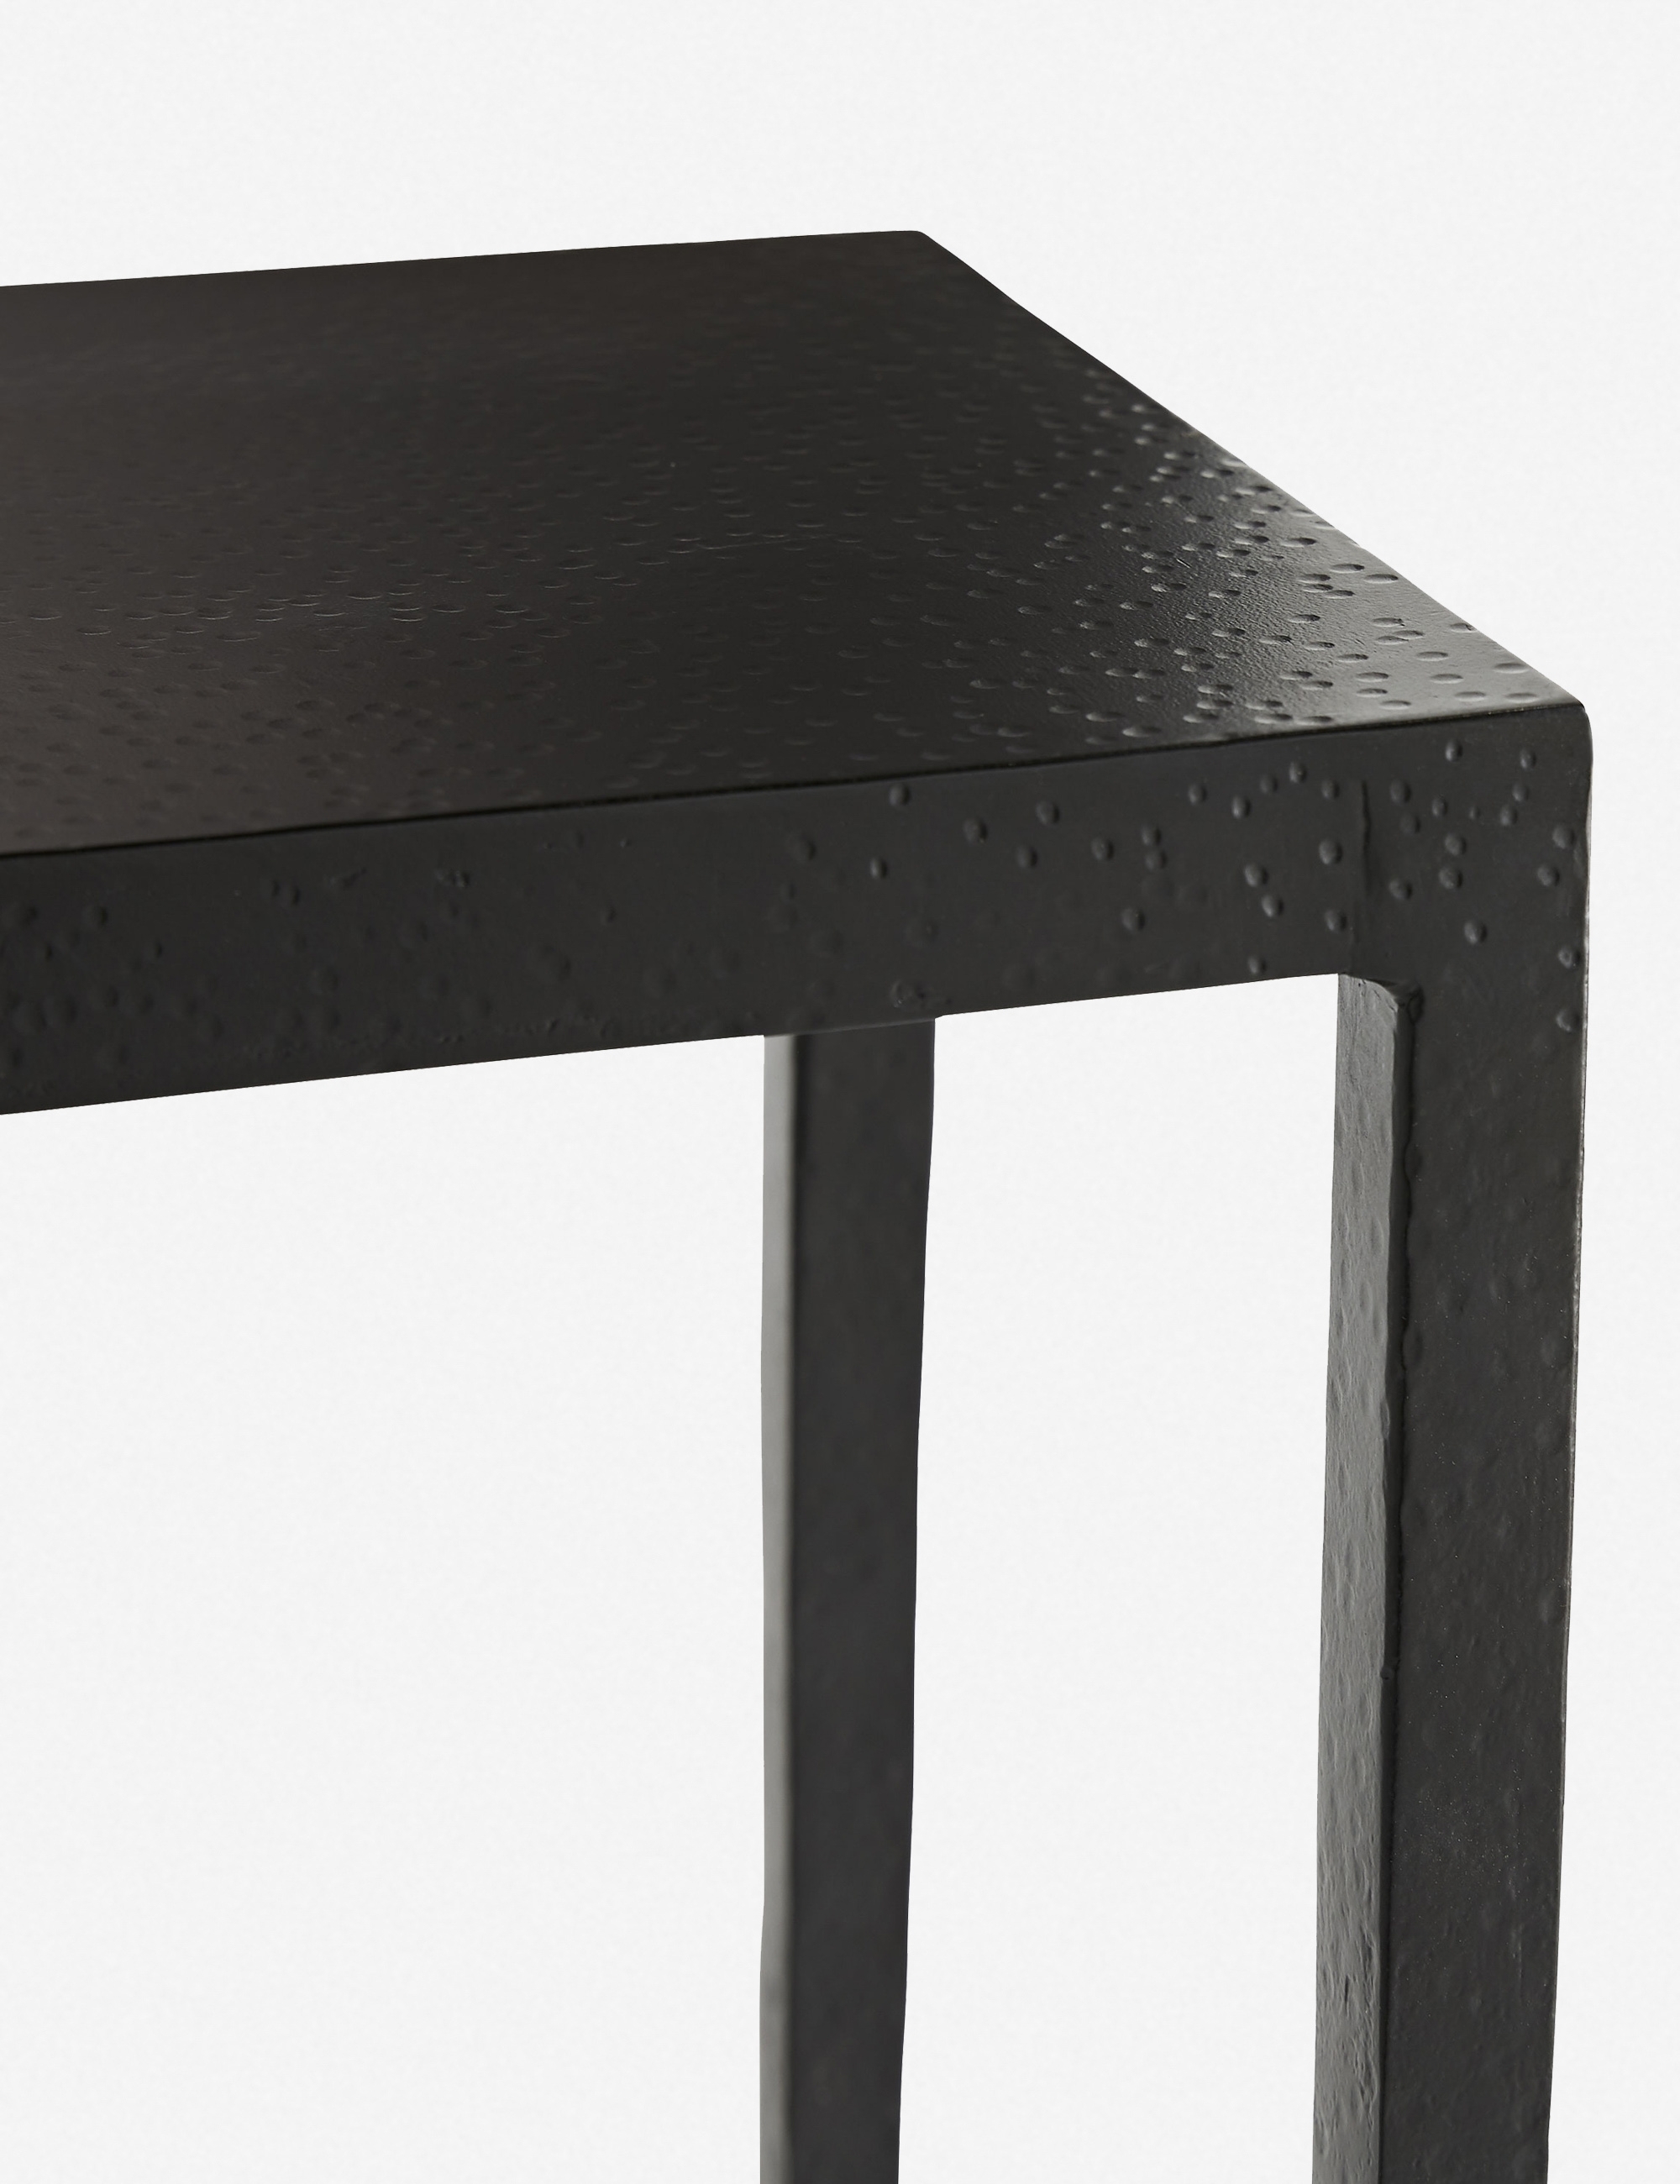 Hogan Console Table by Arteriors - Image 5